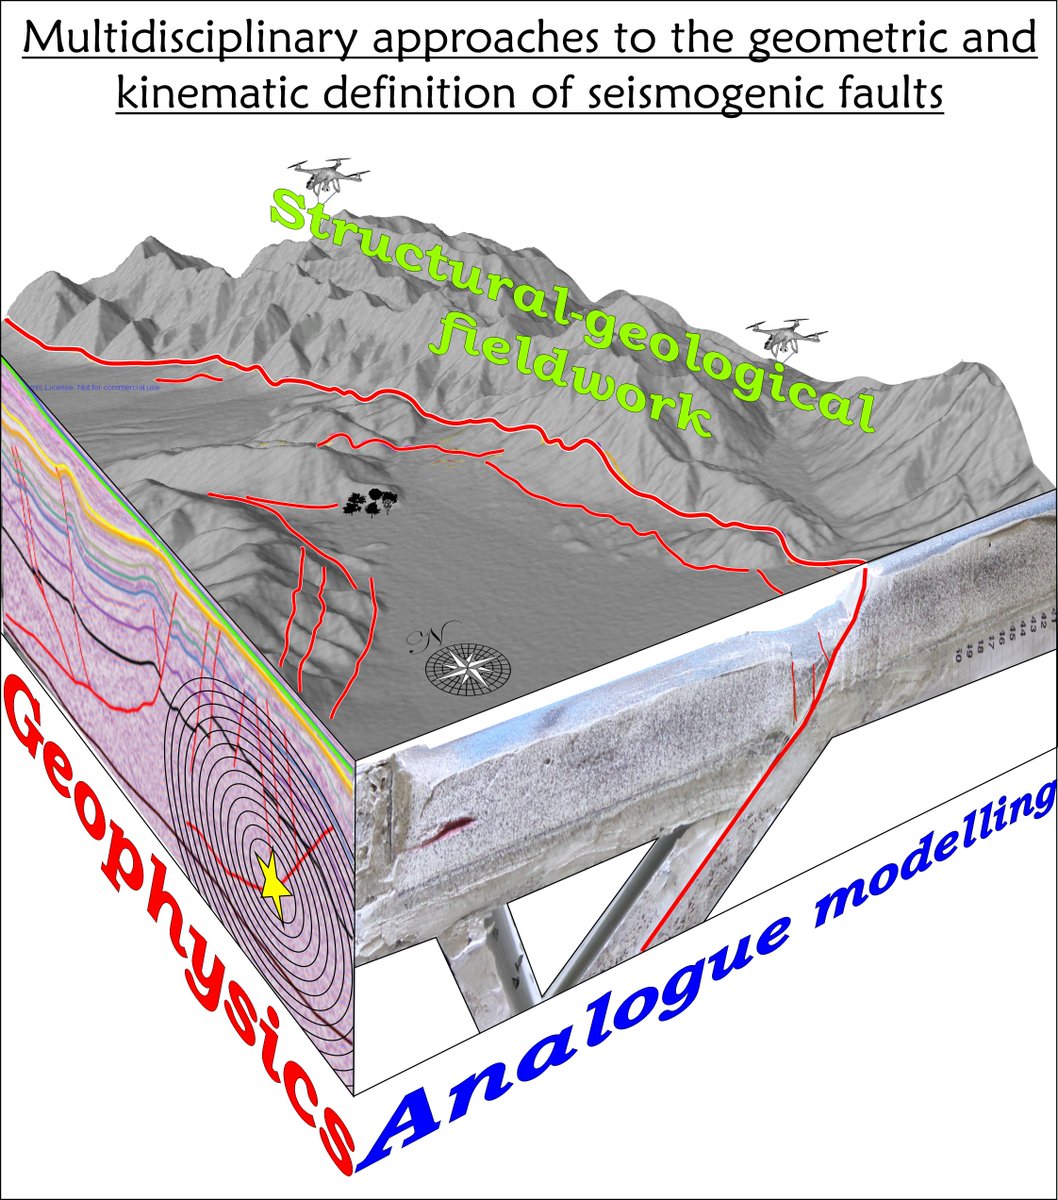 Working on active tectonics and seismogenic faults? Submit an abstract to the upcoming Italian Geological Society conference (3-5 September, Bari, Italy) Check for session T79! Abstract deadline 26/4, 19:00 CET geoscienze.org/N254/sessionT7… @AdaDeMatte @Geo_SimoneBello @framae80